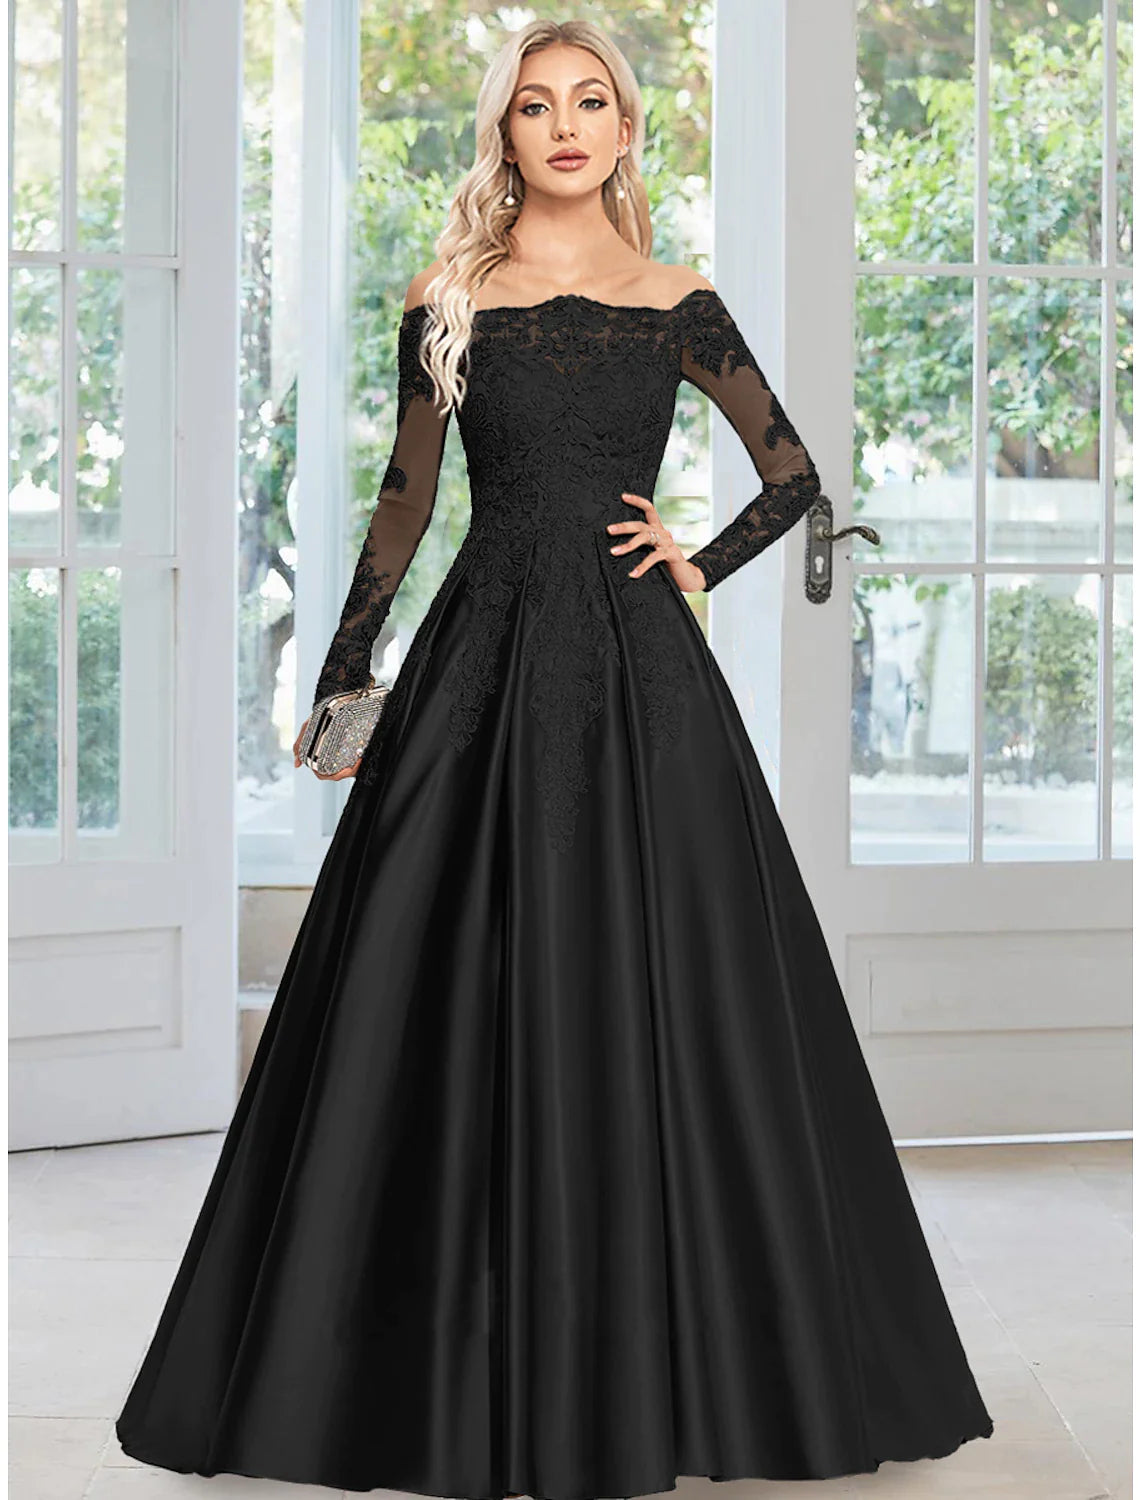 A-Line Evening Gown Floral Dress Formal Court Train Long Sleeve Off Shoulder Satin with Appliques